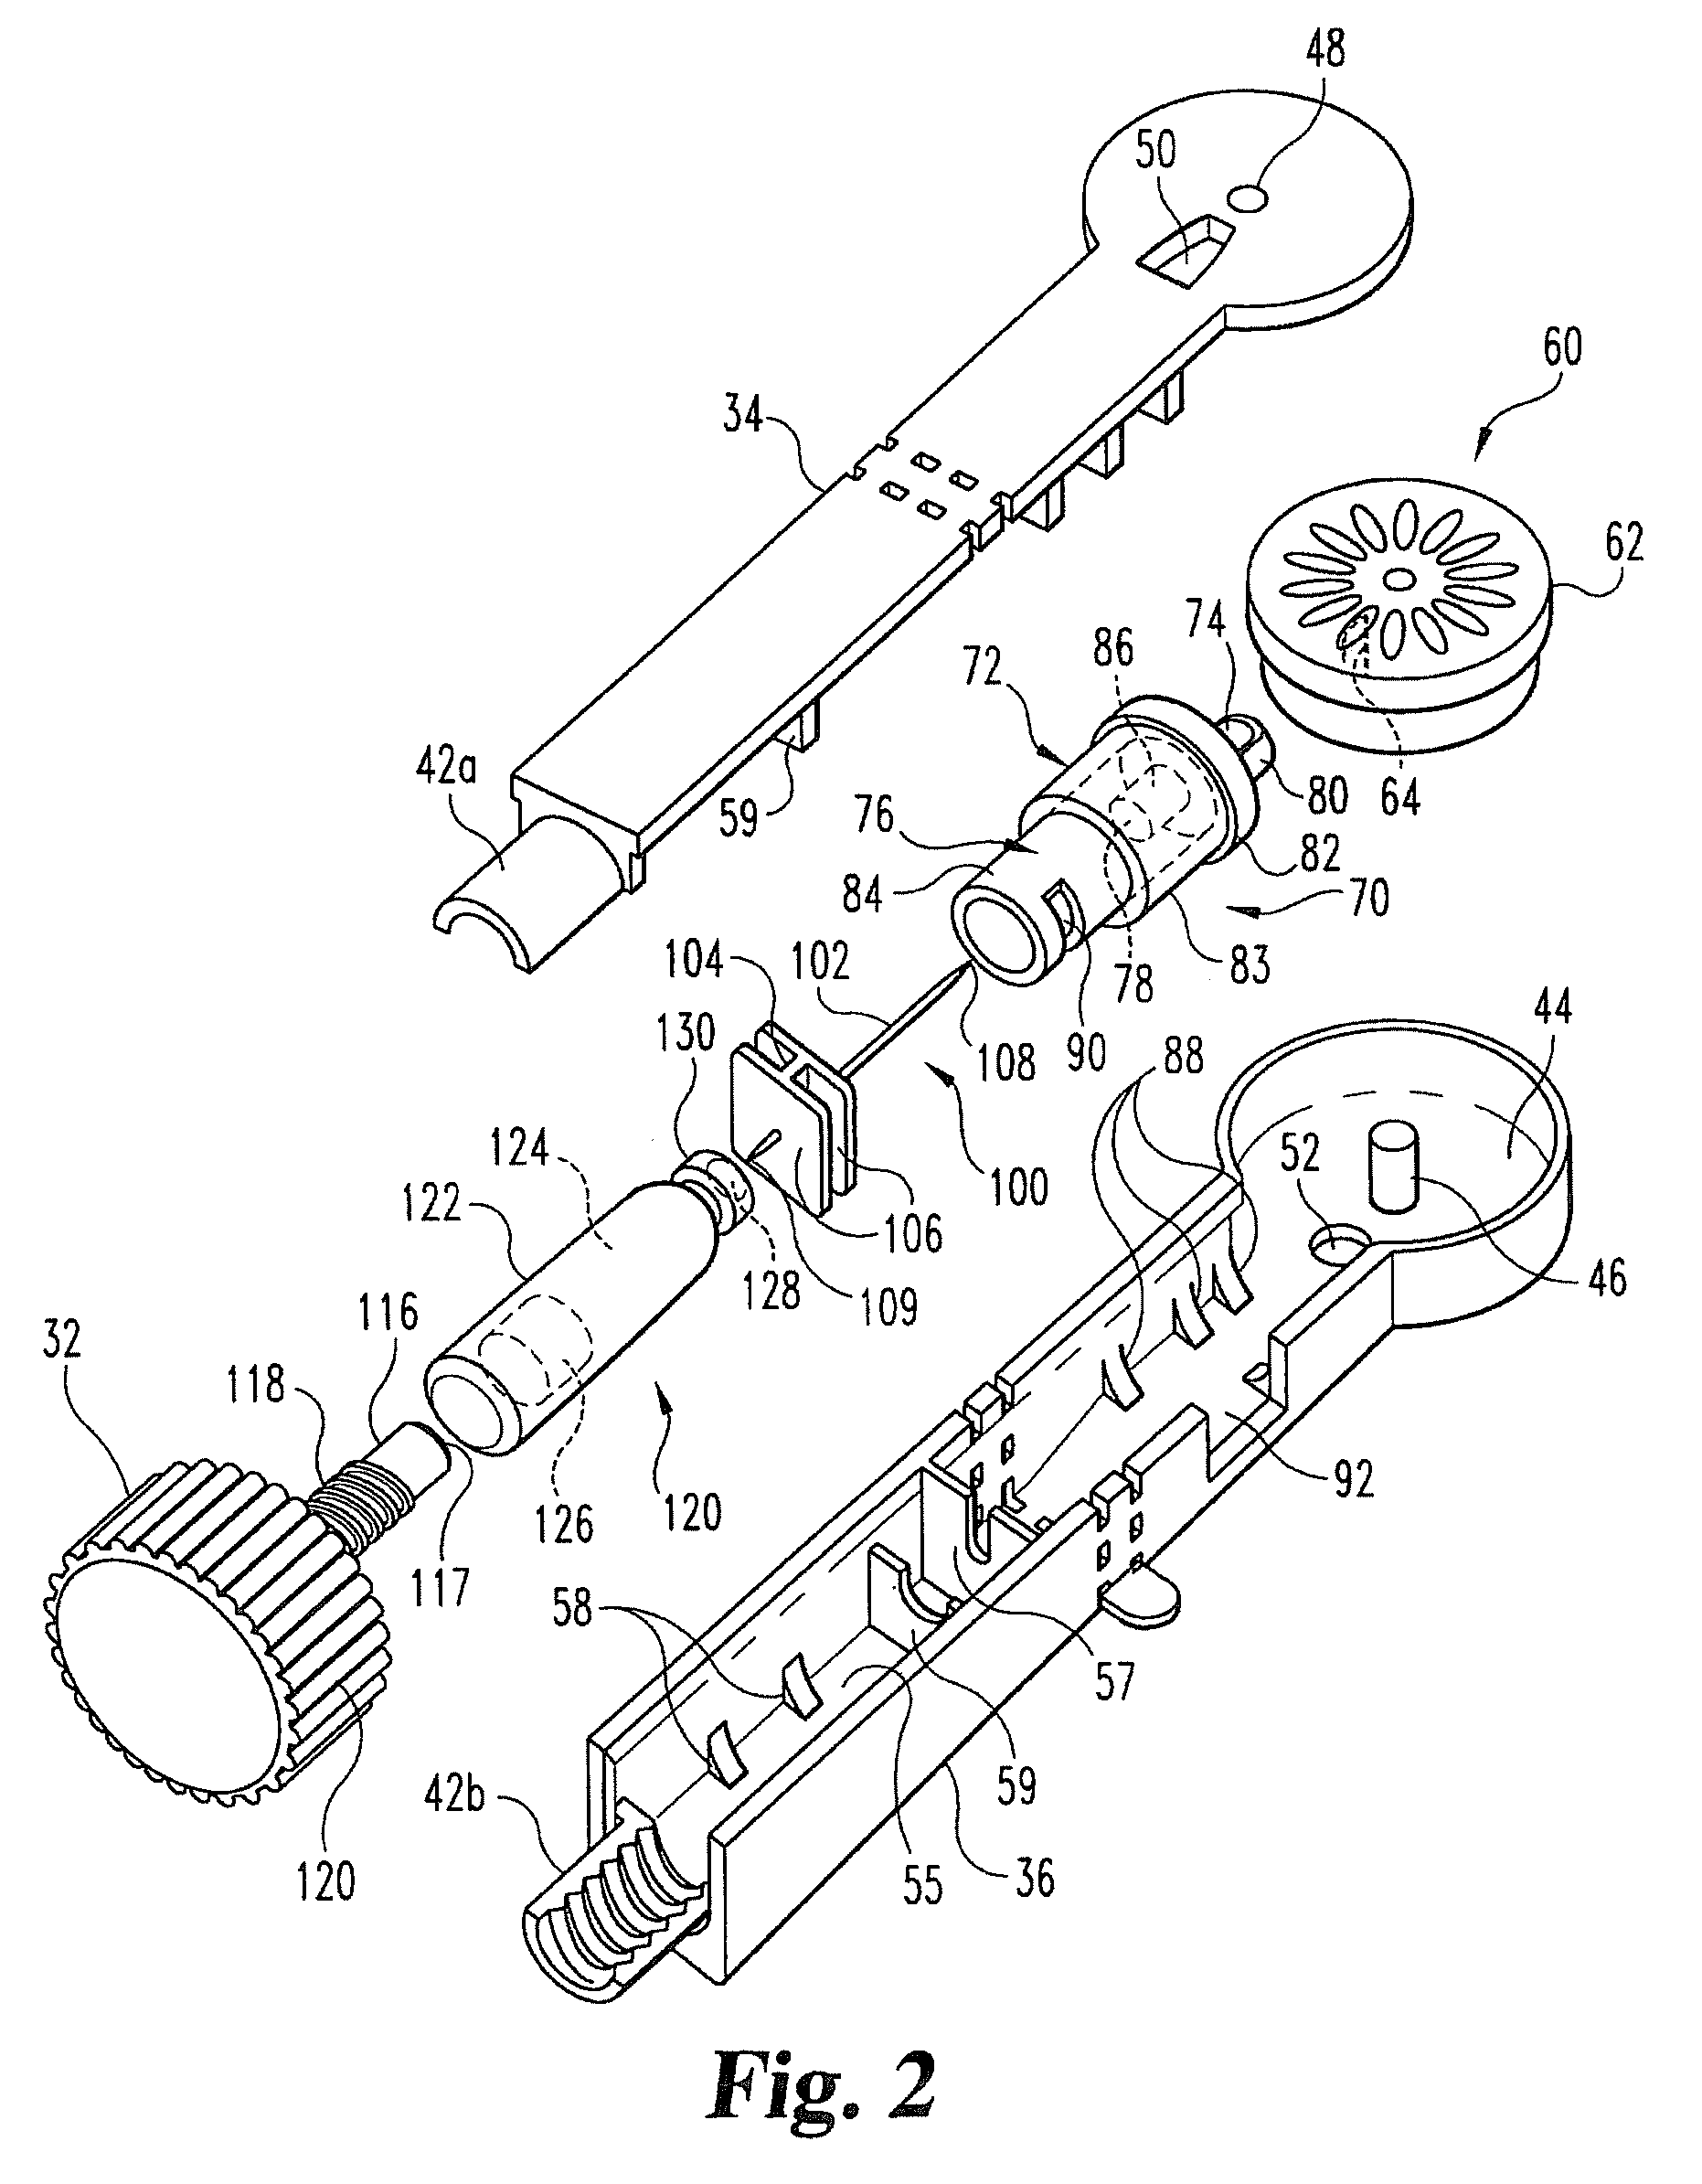 Module for a medication injection device